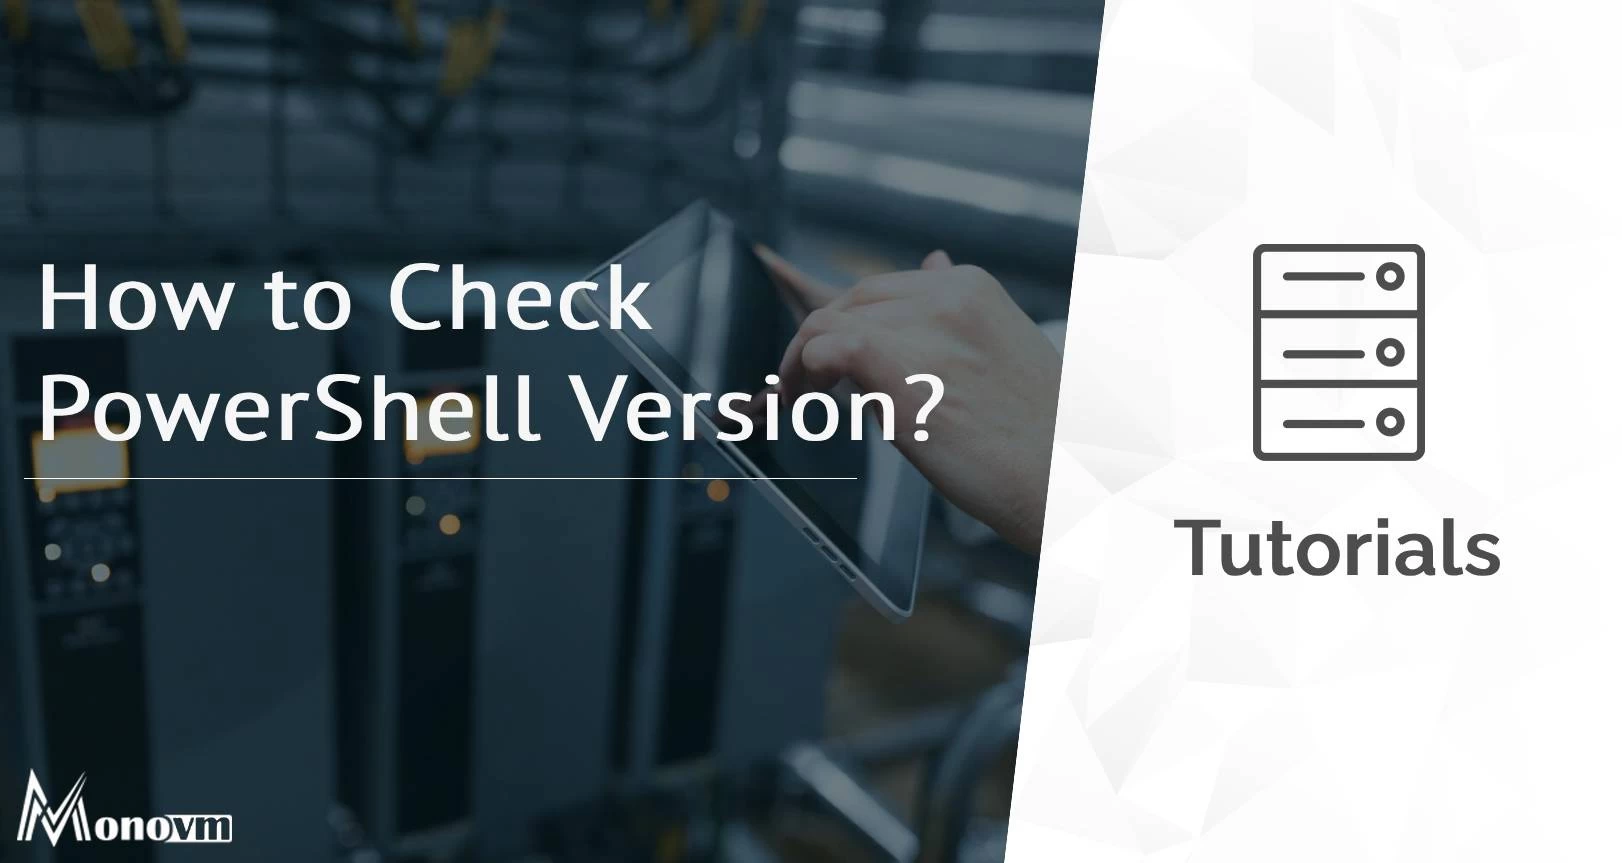 How to Check PowerShell Version?